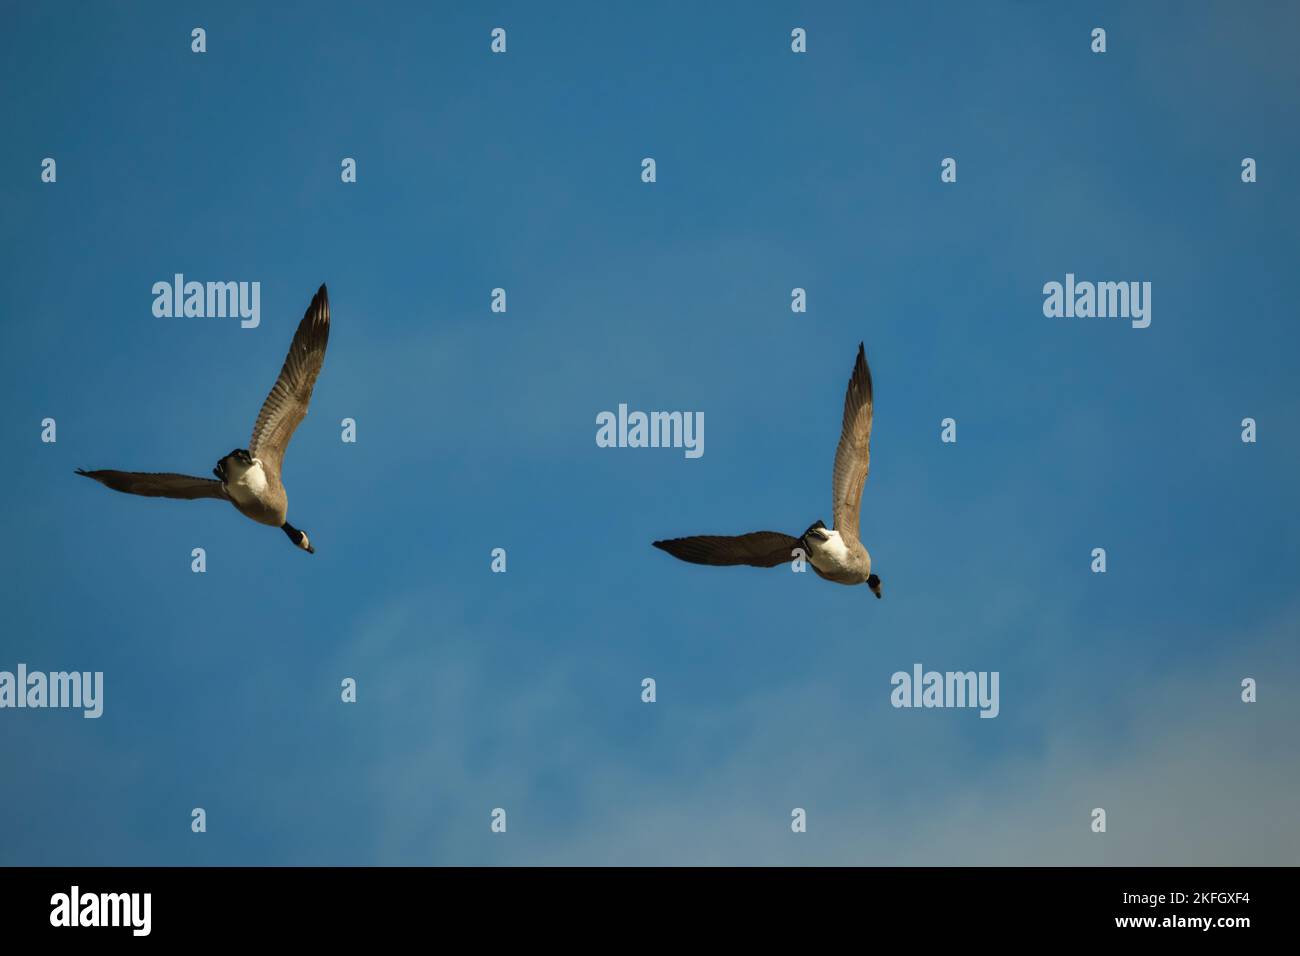 A pair of Canada geese (Branta canadensis) seen from below as they fly overhead and downwards, their wings outstretched. Stock Photo